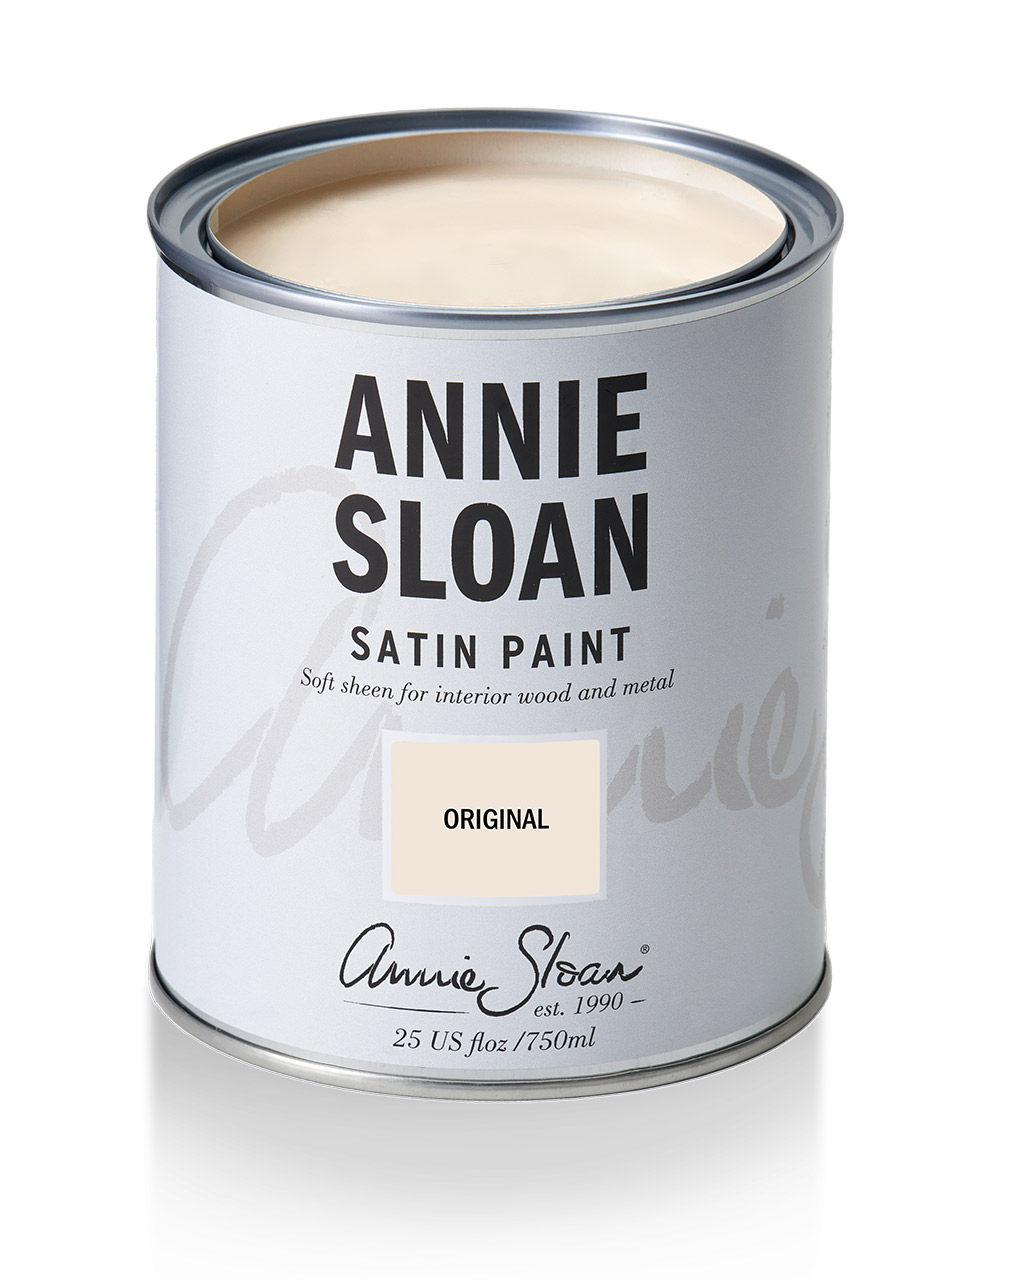 Product shot of Annie Sloan Satin Paint tin in Original